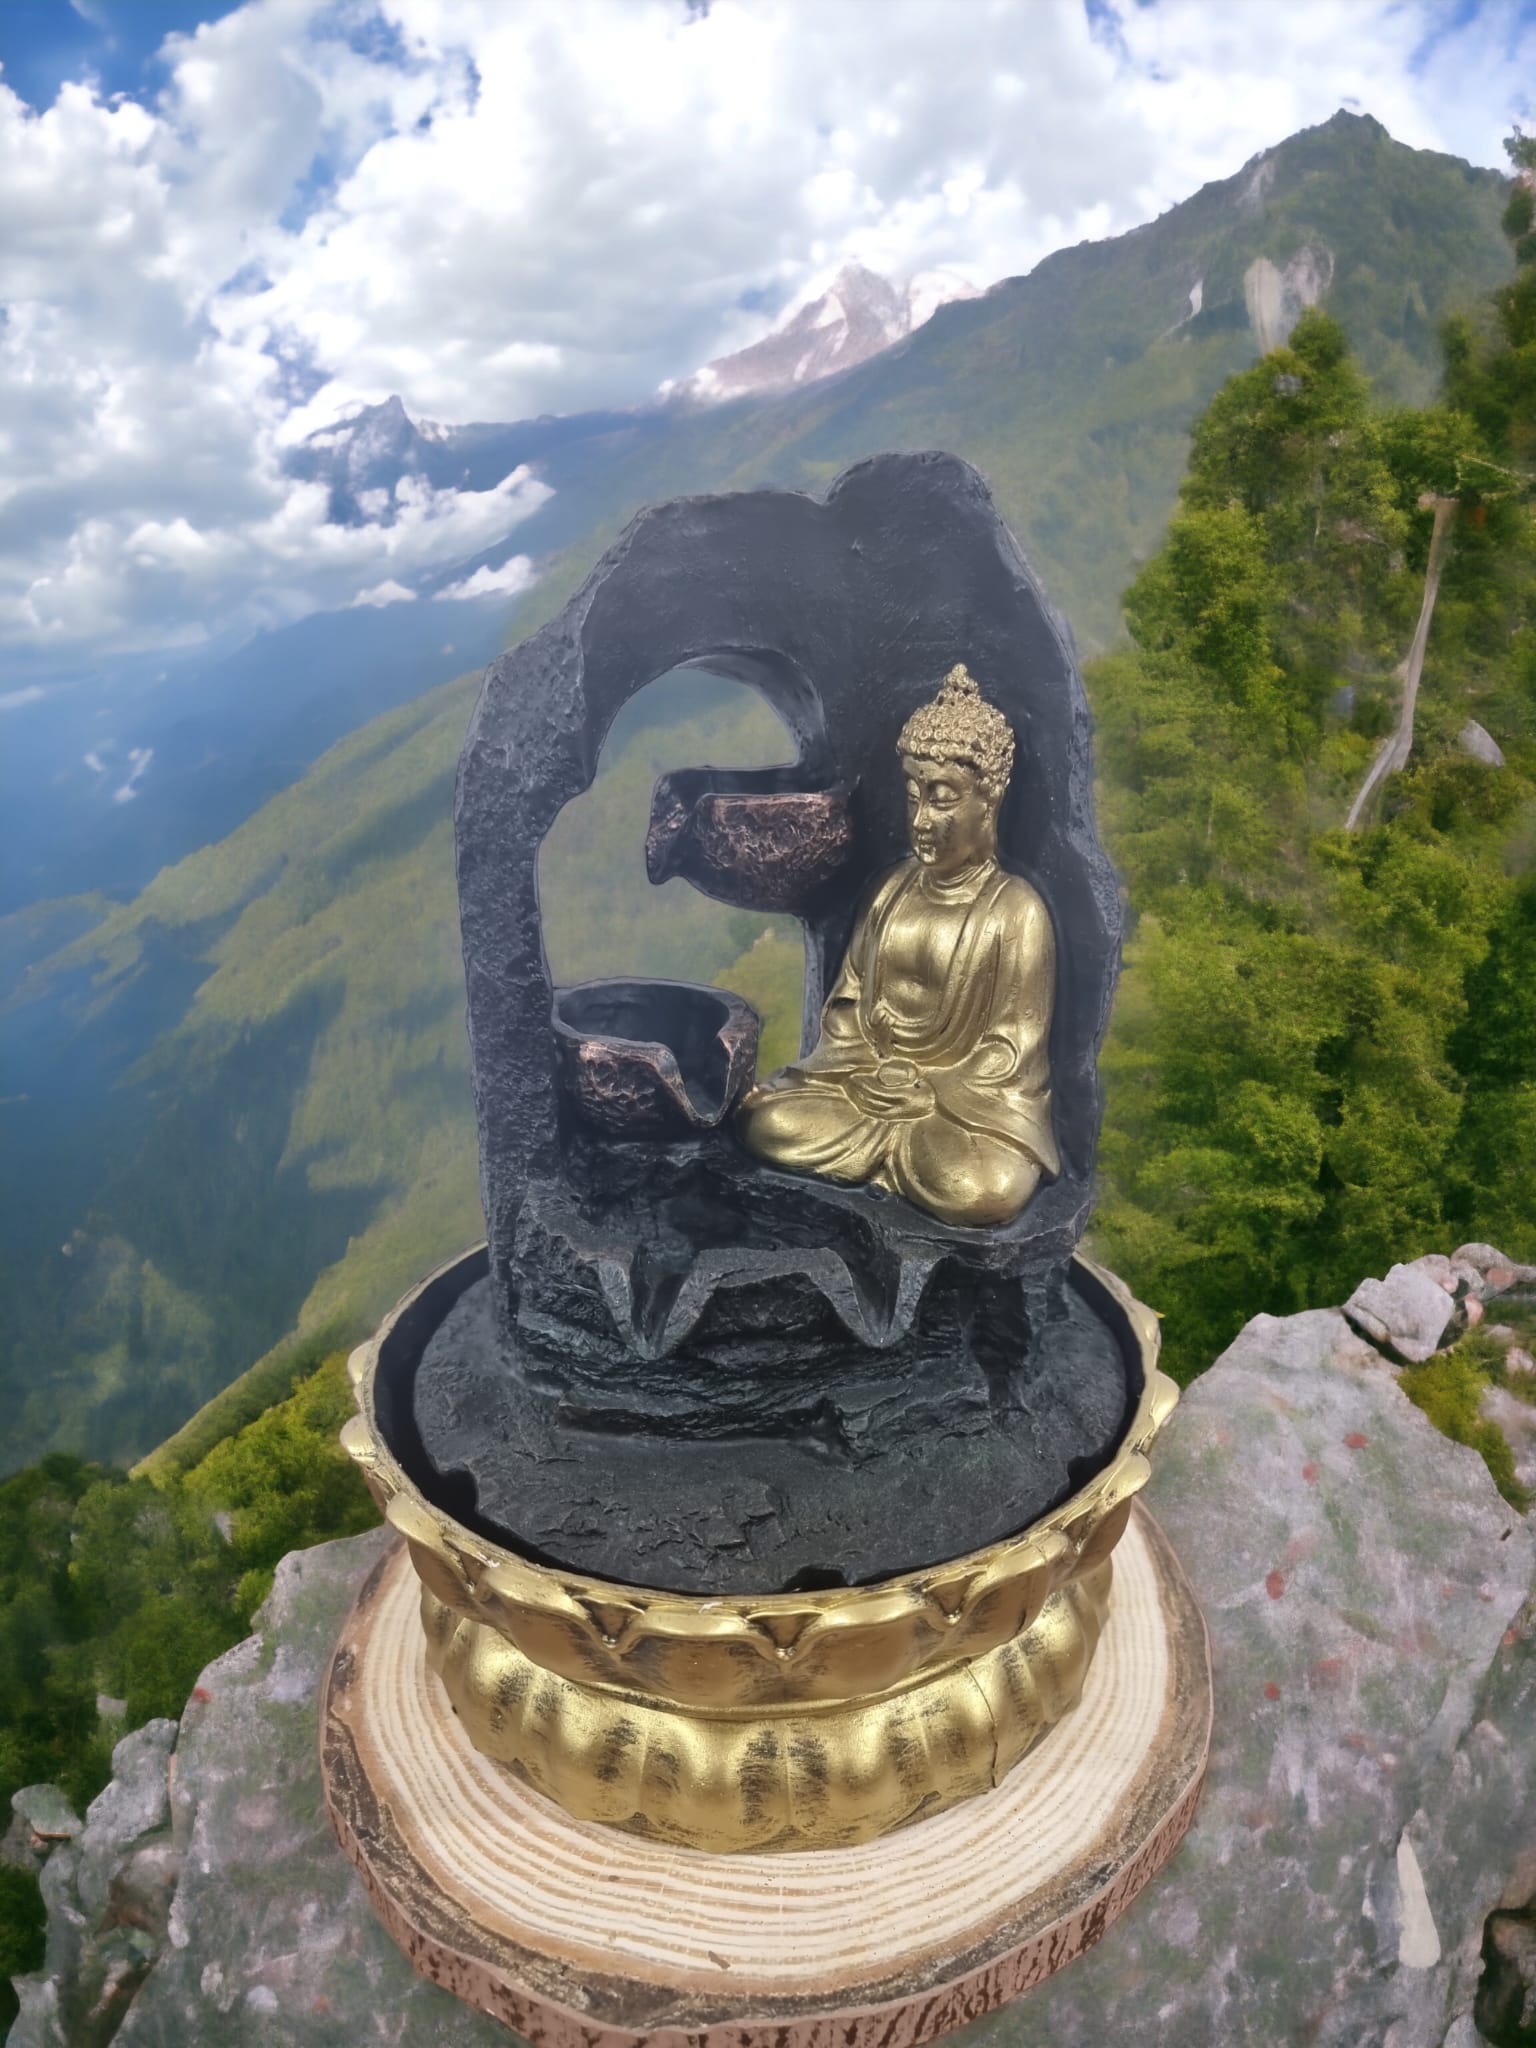 Golden Meditating Buddha Tabletop Water Feature: Serenity in Motion - Auras Workshop  -  Home Decor -   - Cyprus & Greece - Wholesale - Retail #